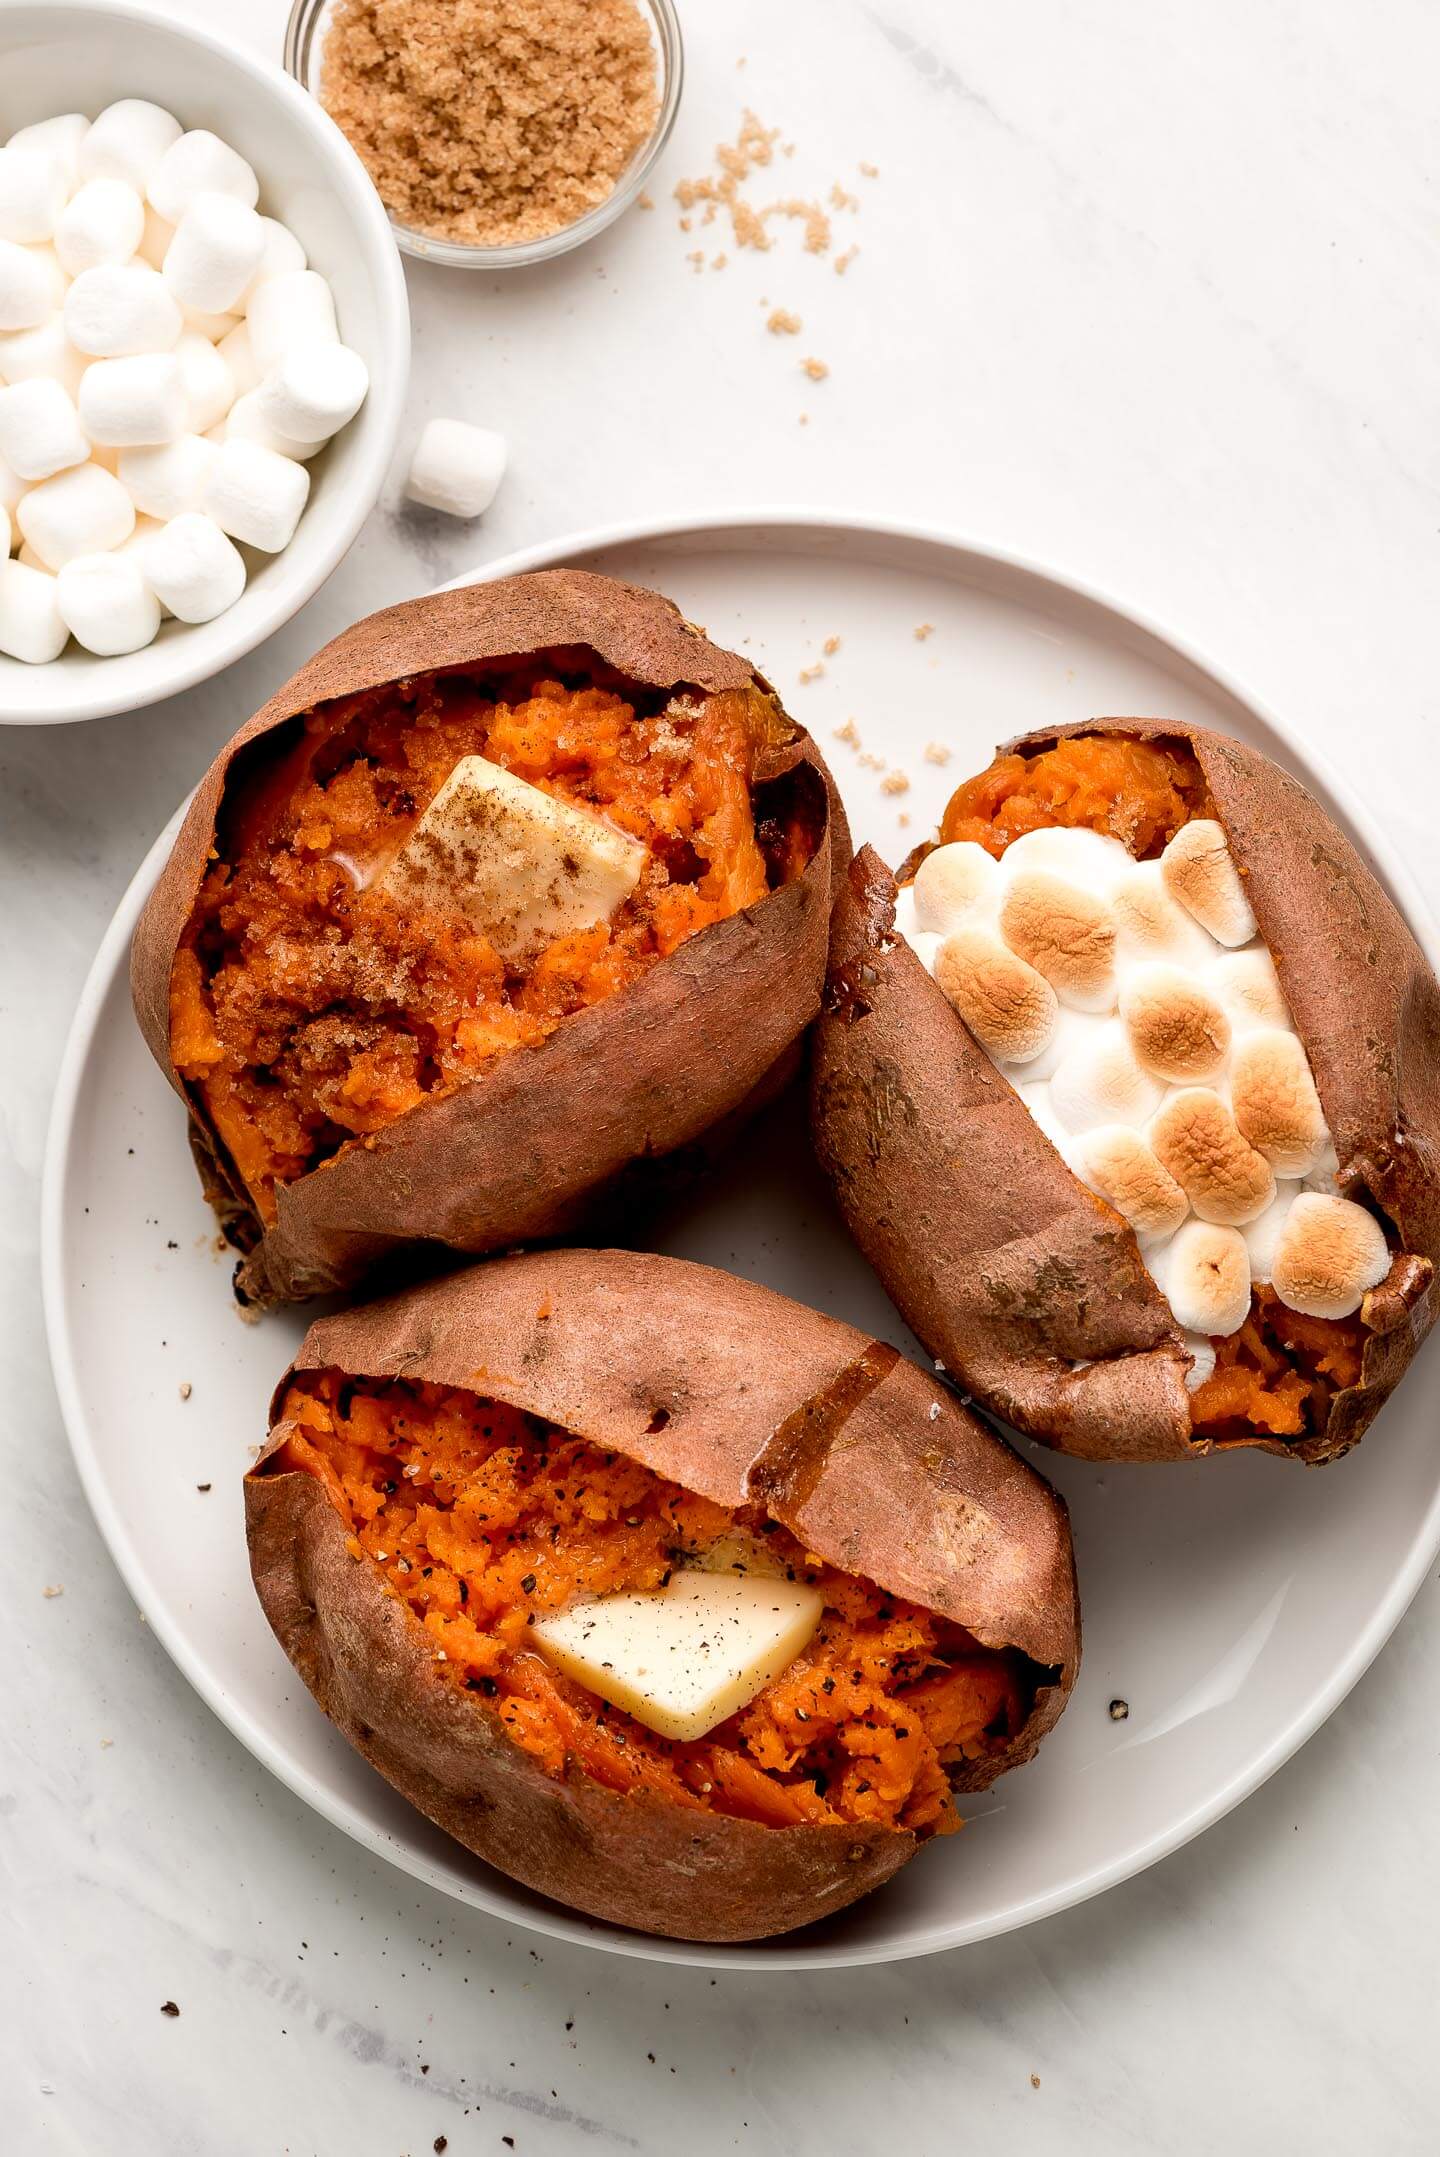 Baked Sweet Potatoes garnished with various toppings and marshmallows and brown sugar to the side.